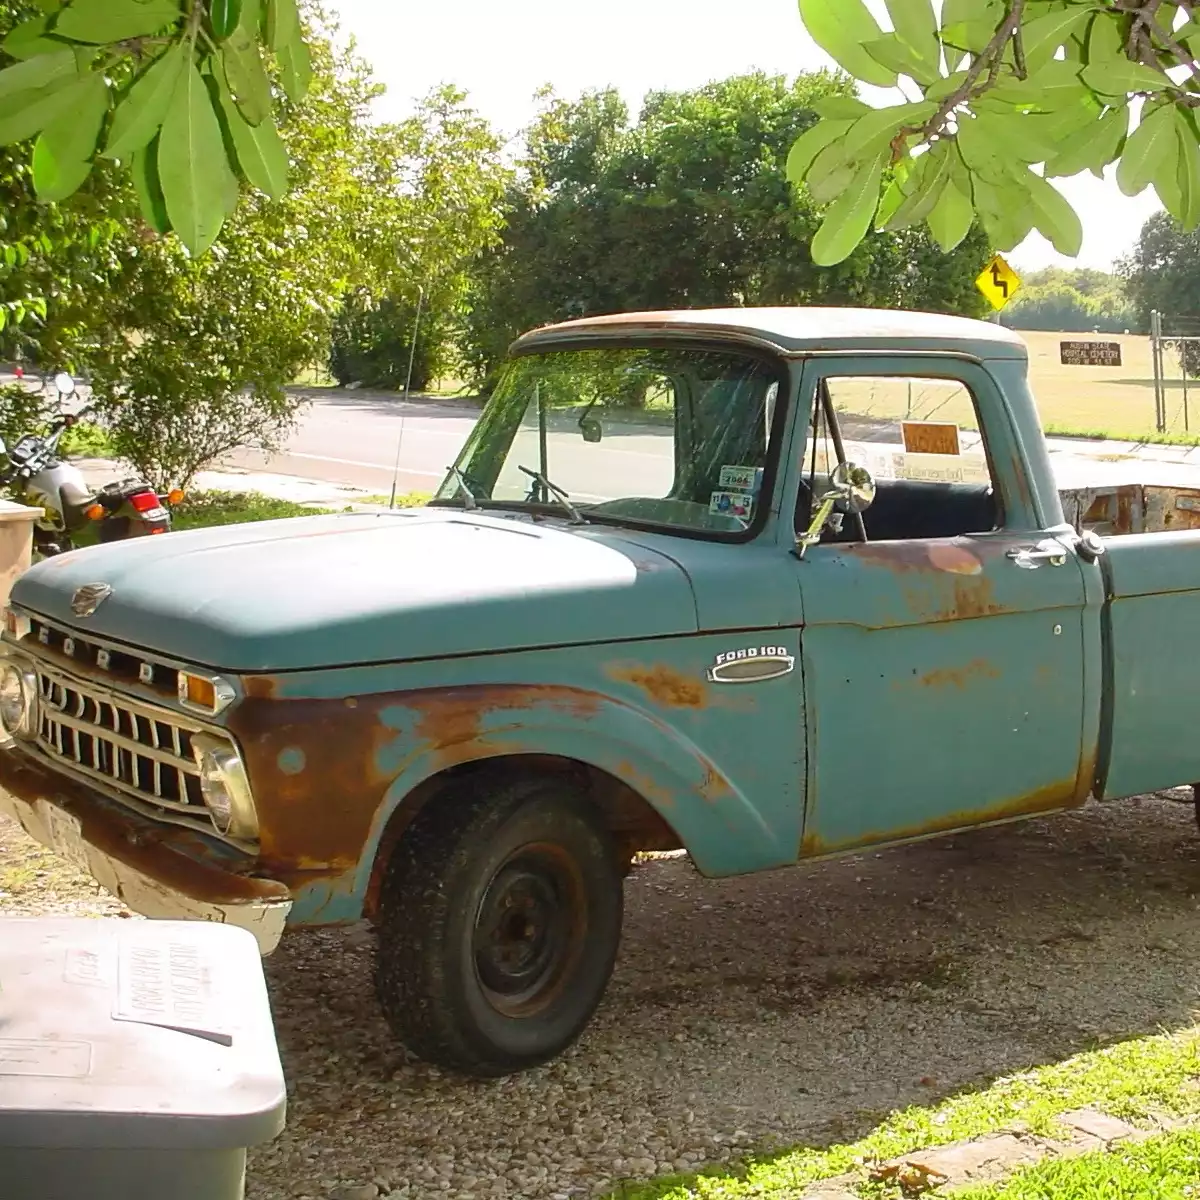 Oblique view of a vintage blue truck in a driveway with green lawn and leaves all around it.